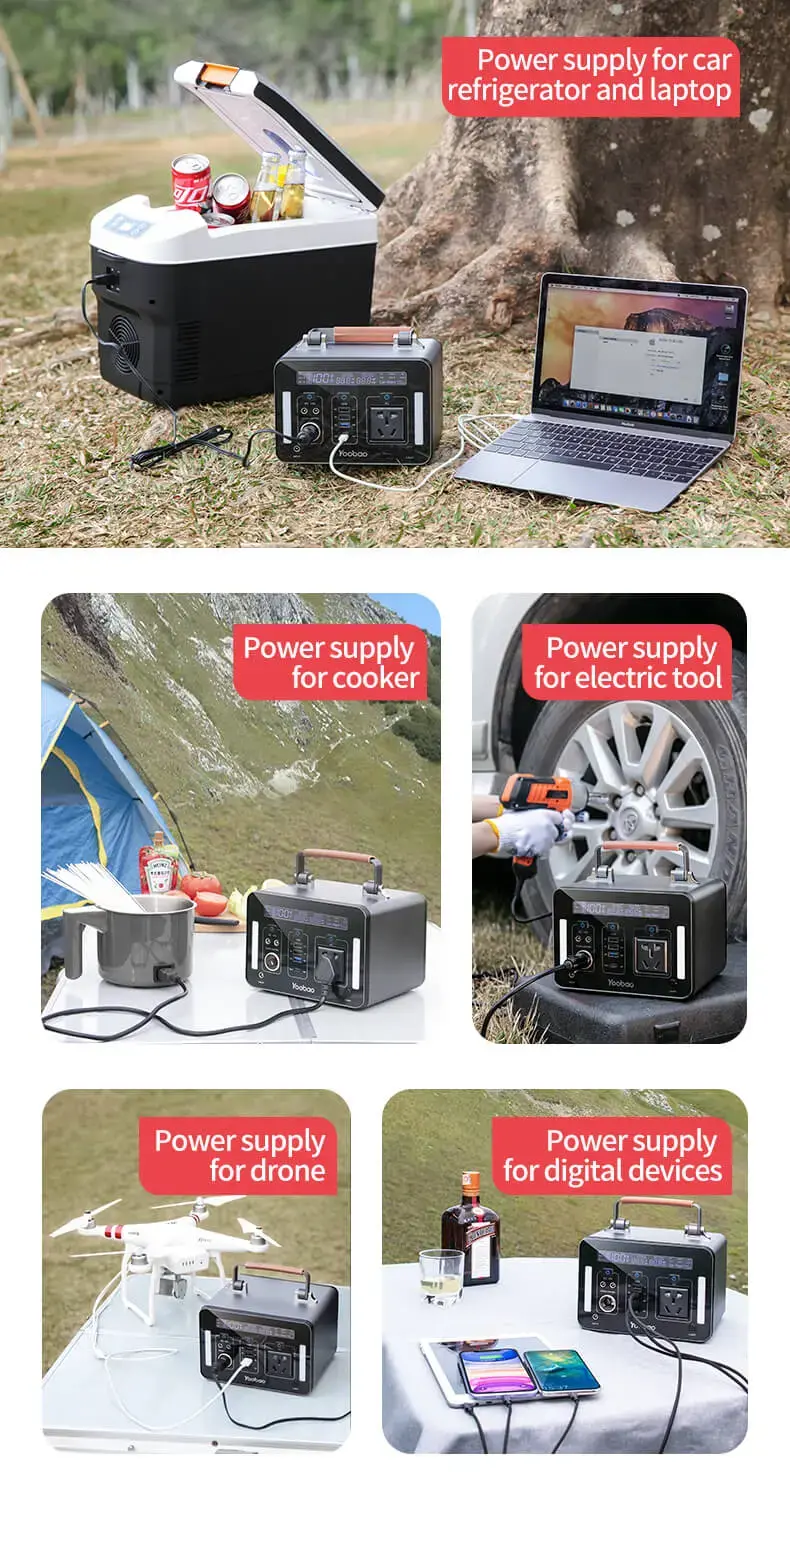 Yoobao En500 135200mah Pd Quick Charging Power Station Outdoor Camping Household Emergency High Capacity With Led Light